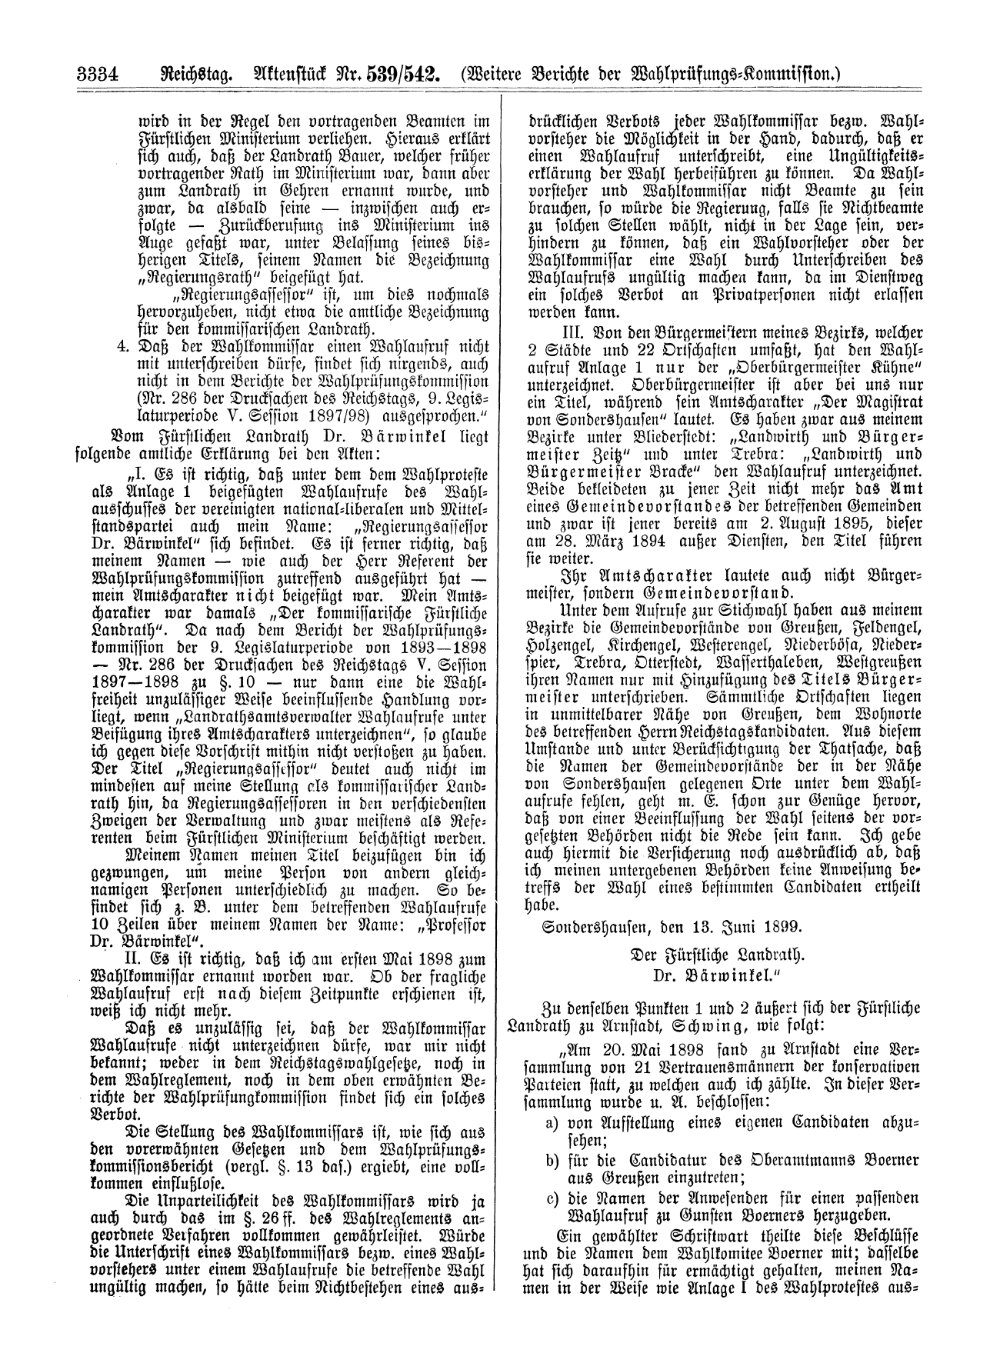 Scan of page 3334